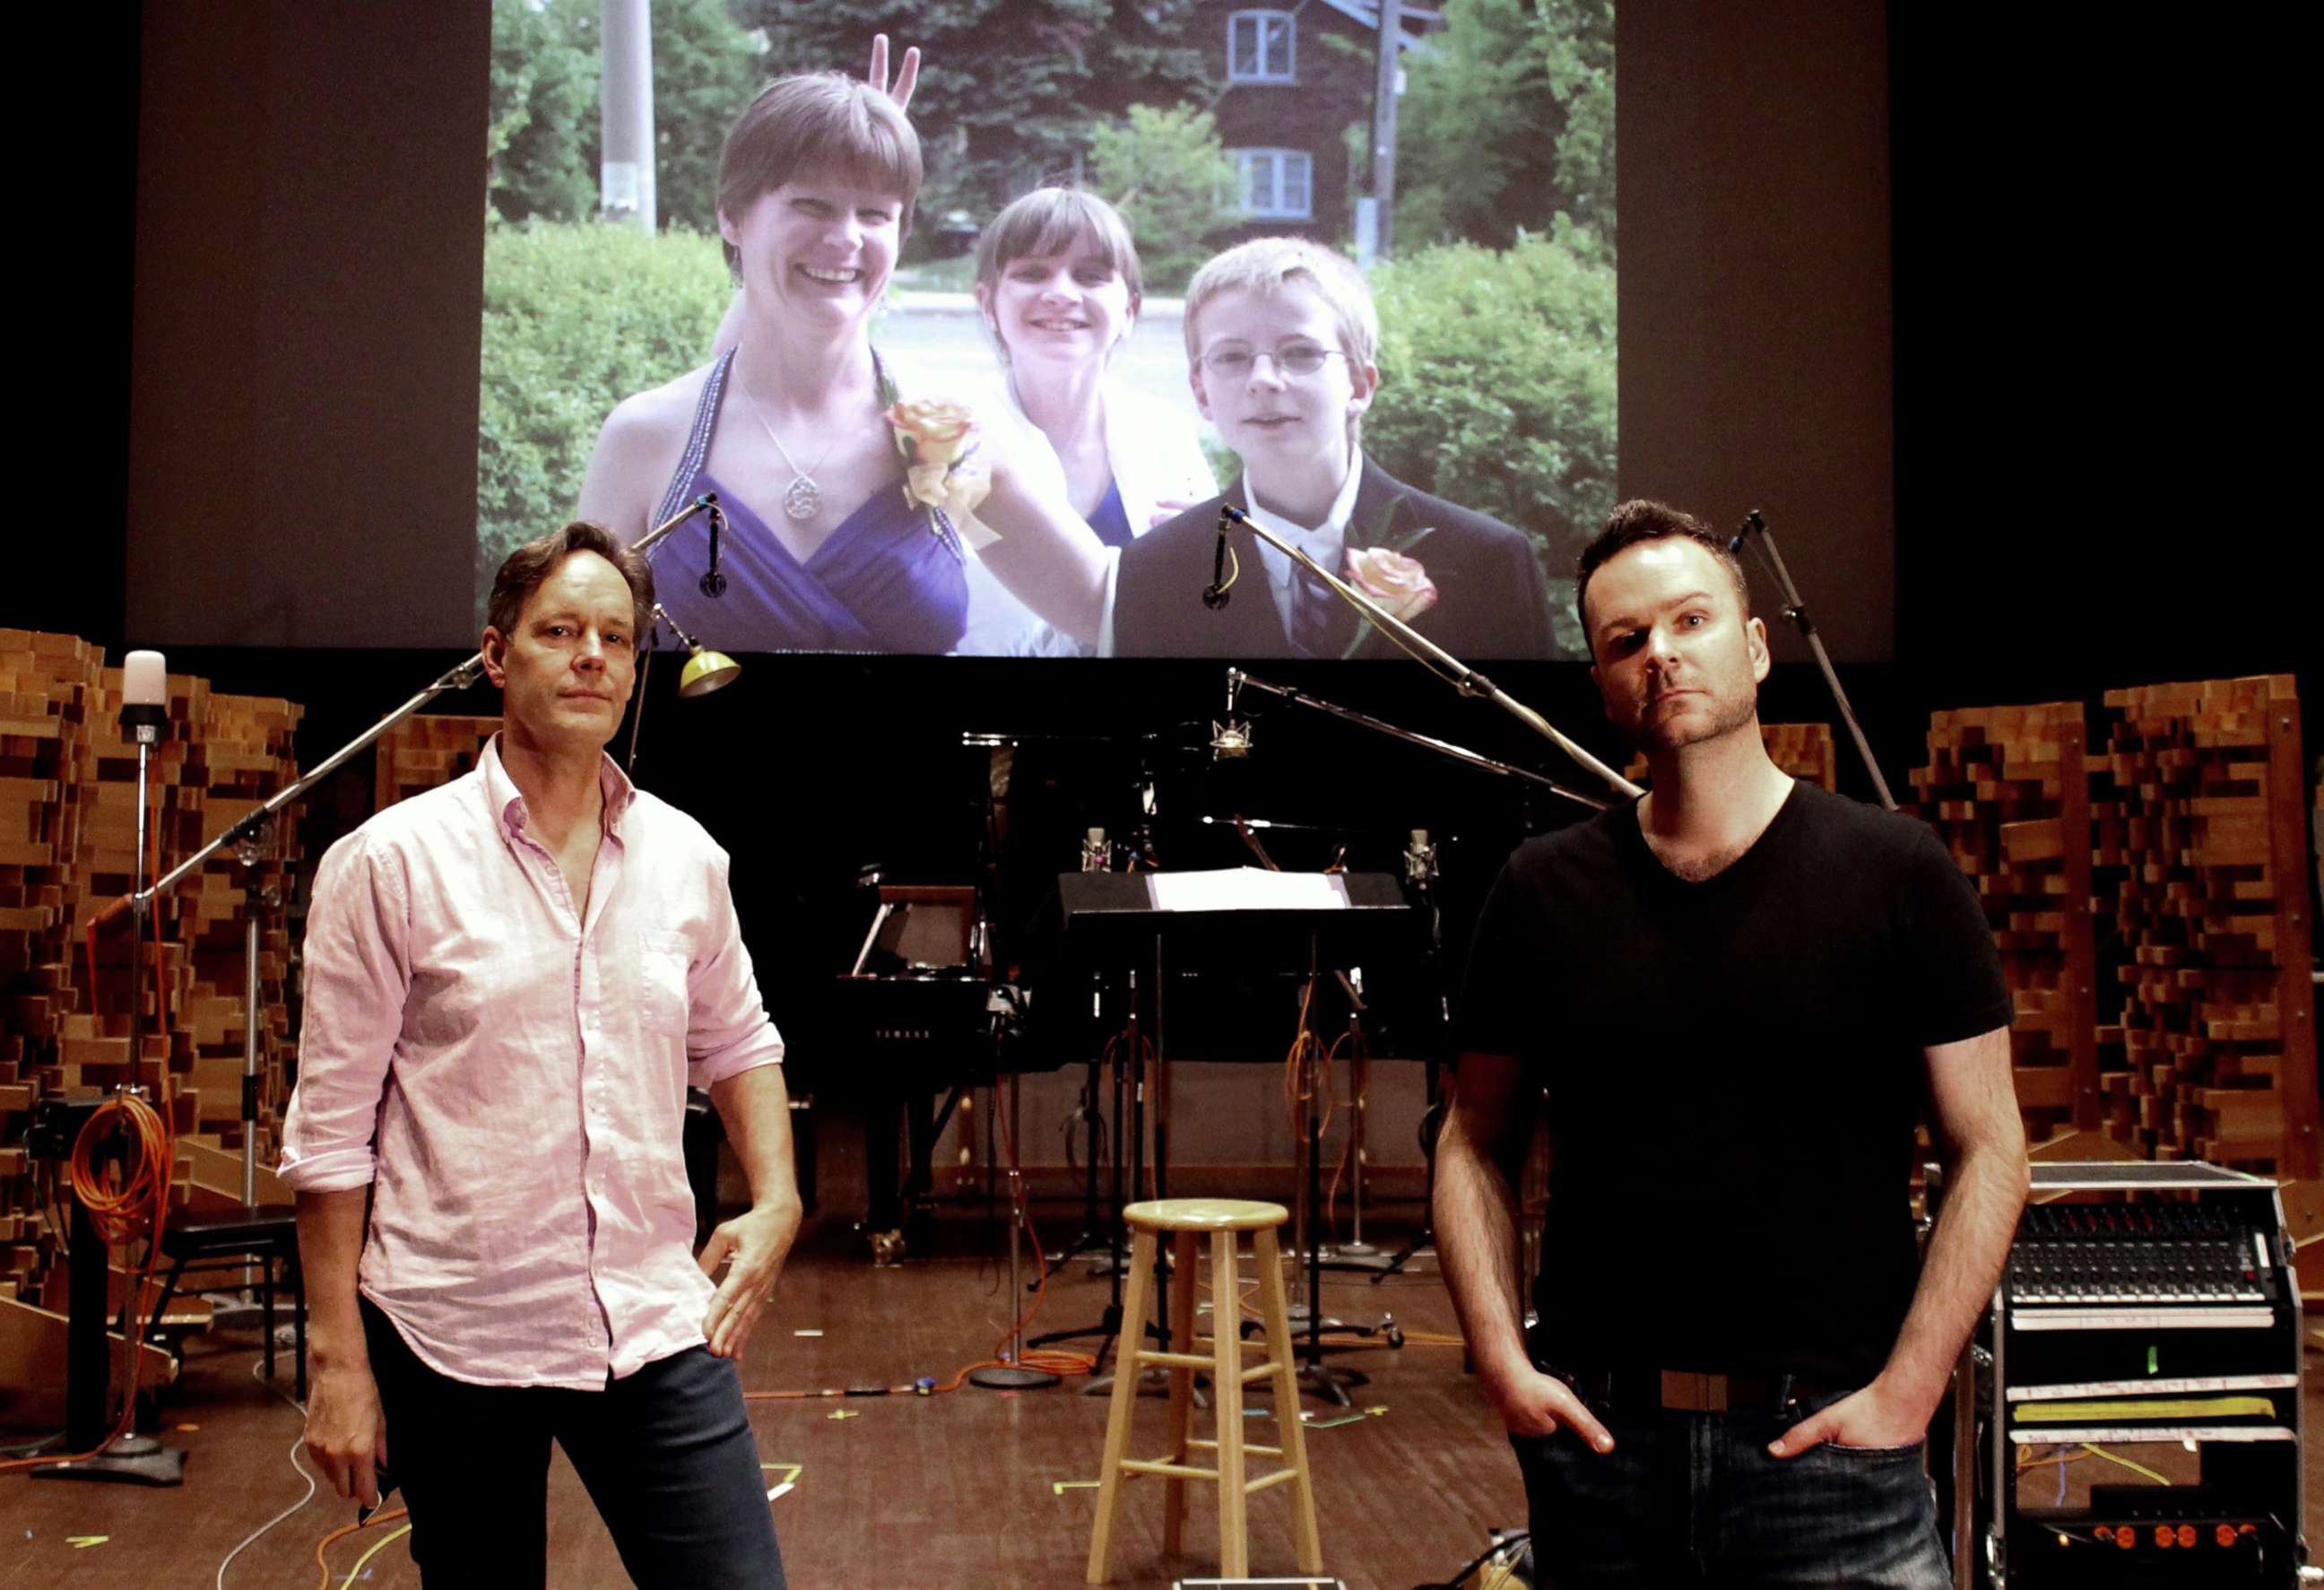 PHOTO: Composer Jake Heggie and baritone Joshua Hopkins on the scoring stage of
Skywalker Sound with an image of Joshua’s sister Nathalie Warmerdam and her two children Valerie and Adrian.